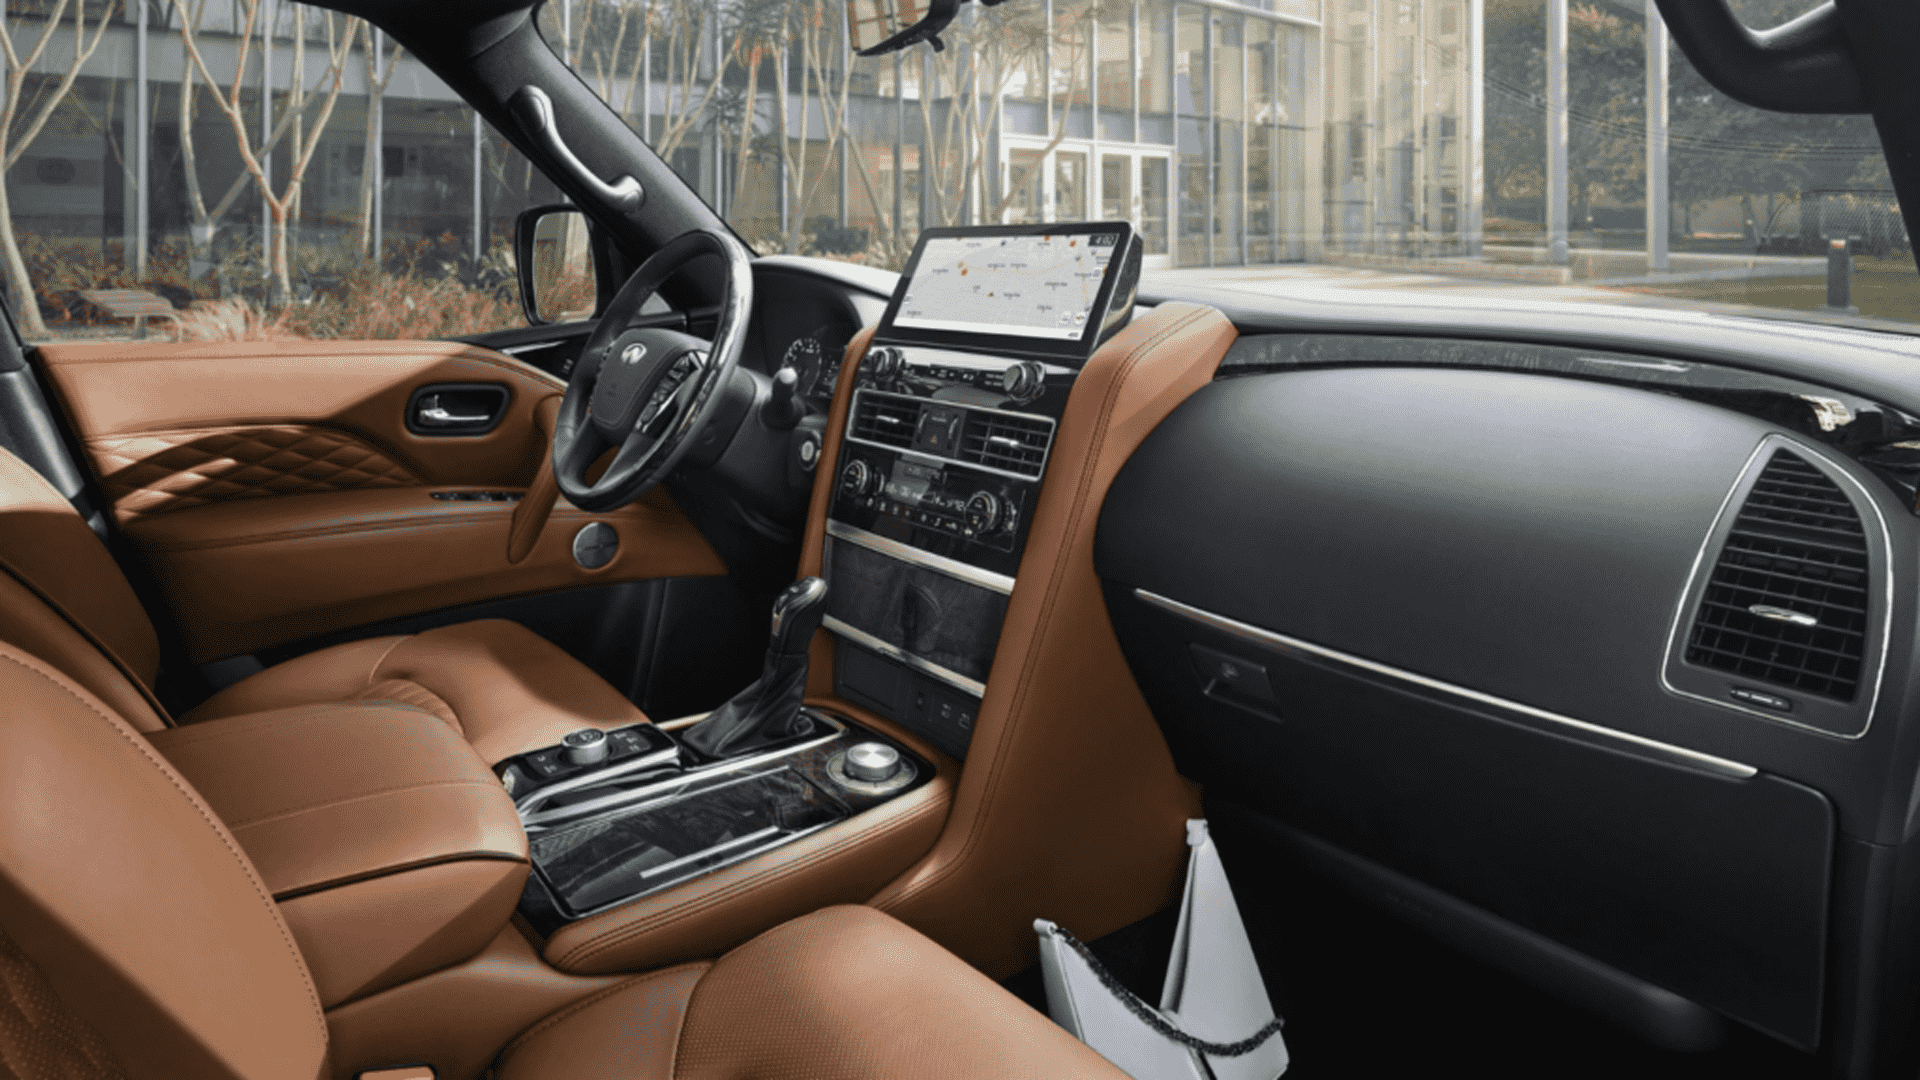 The Interior, Steering, And Central Console Of A 2025 Infiniti QX80